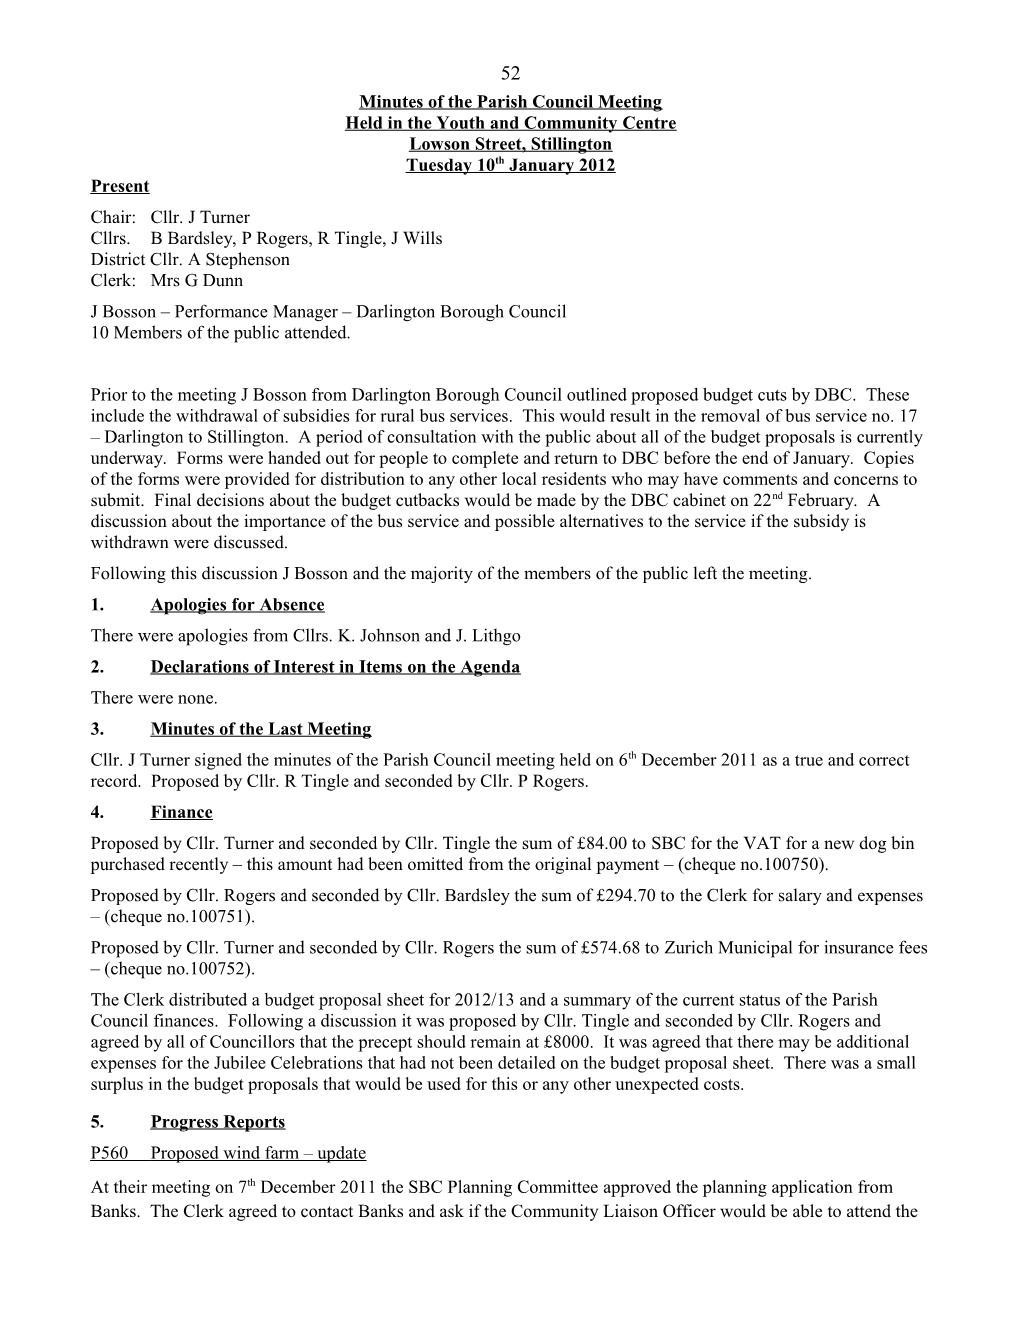 Minutes of the Parish Council Meeting s13